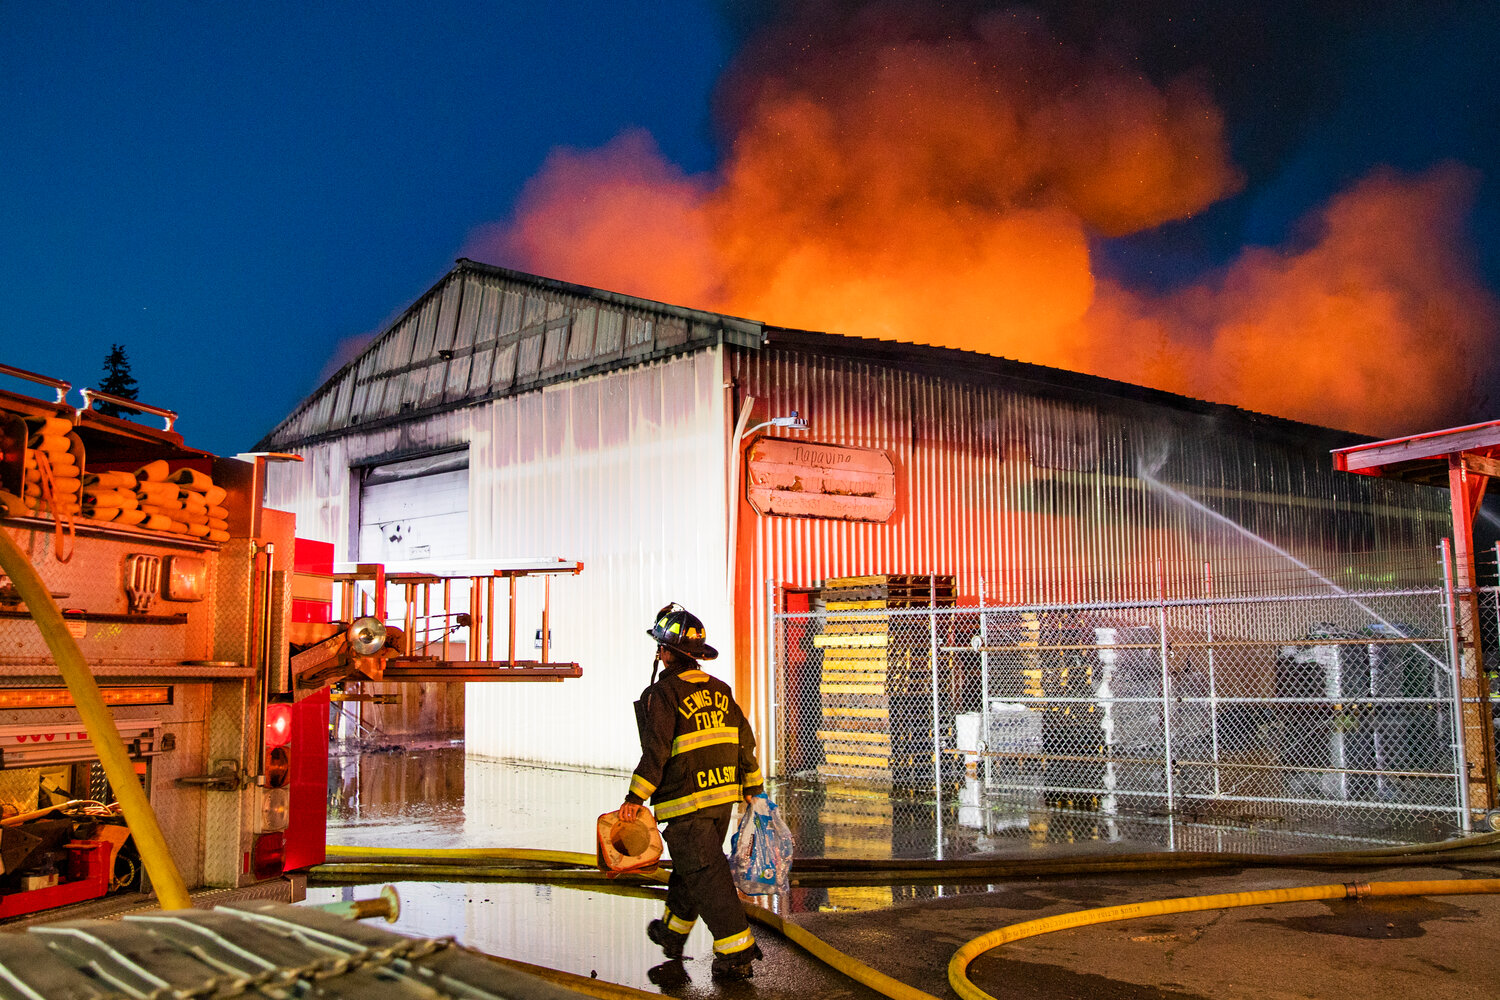 Firefighters are supplied with water bottles as they fight a blaze in an aluminum storage building in Napavine on Saturday, June 3.